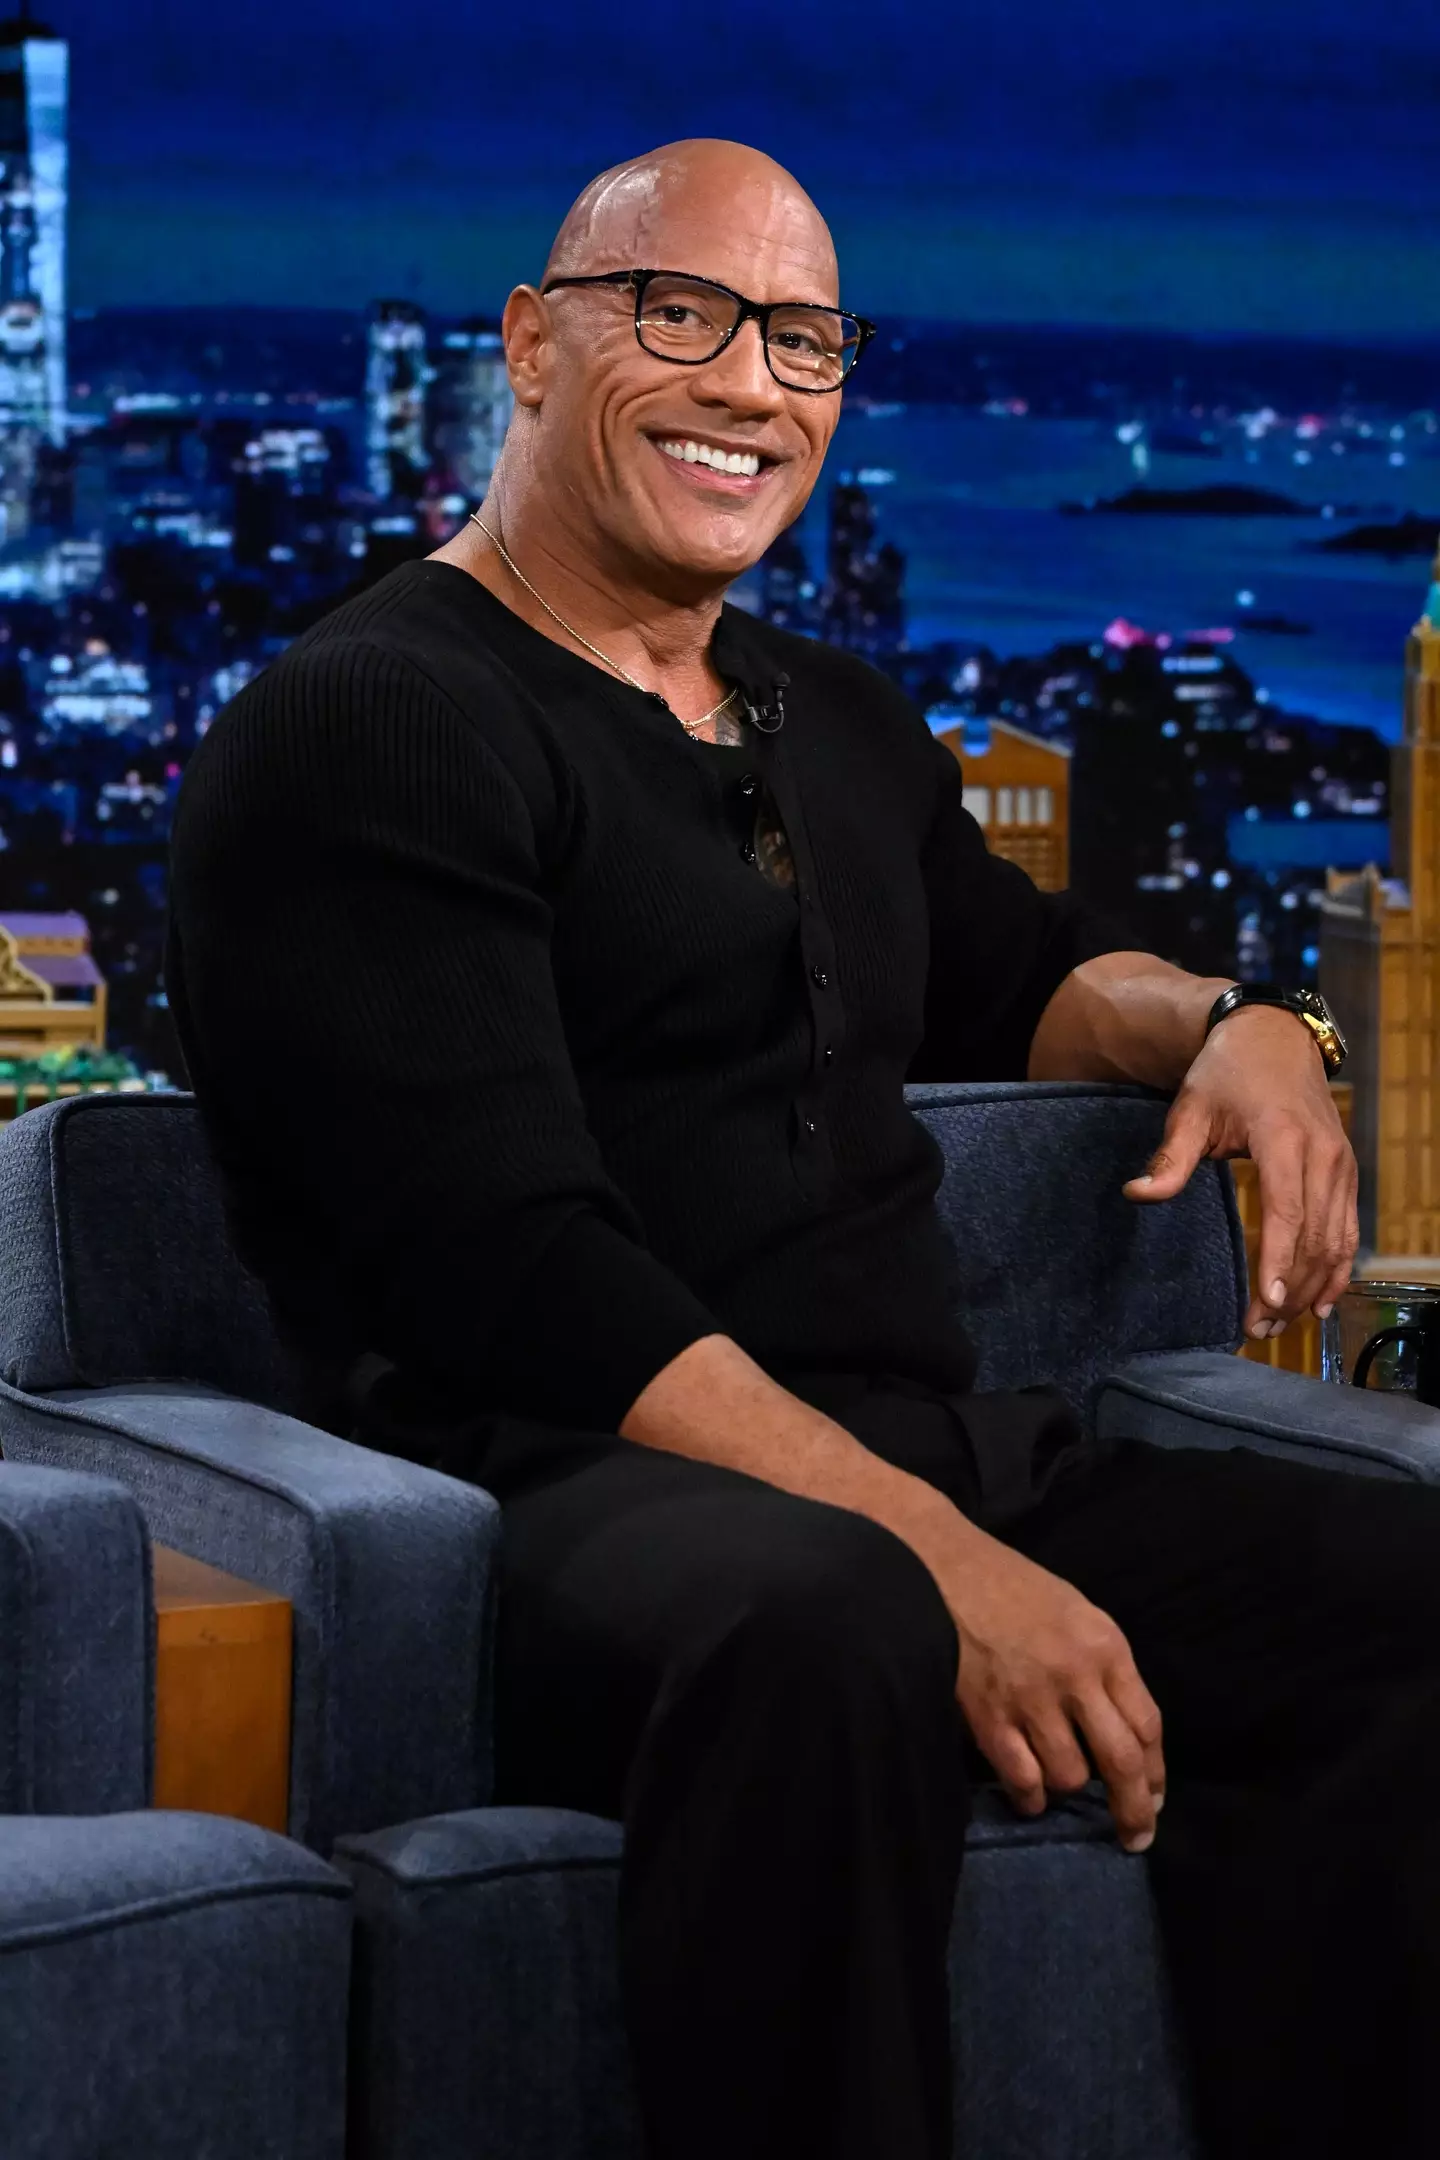 Dwayne Johnson wants to find out who the individual is.